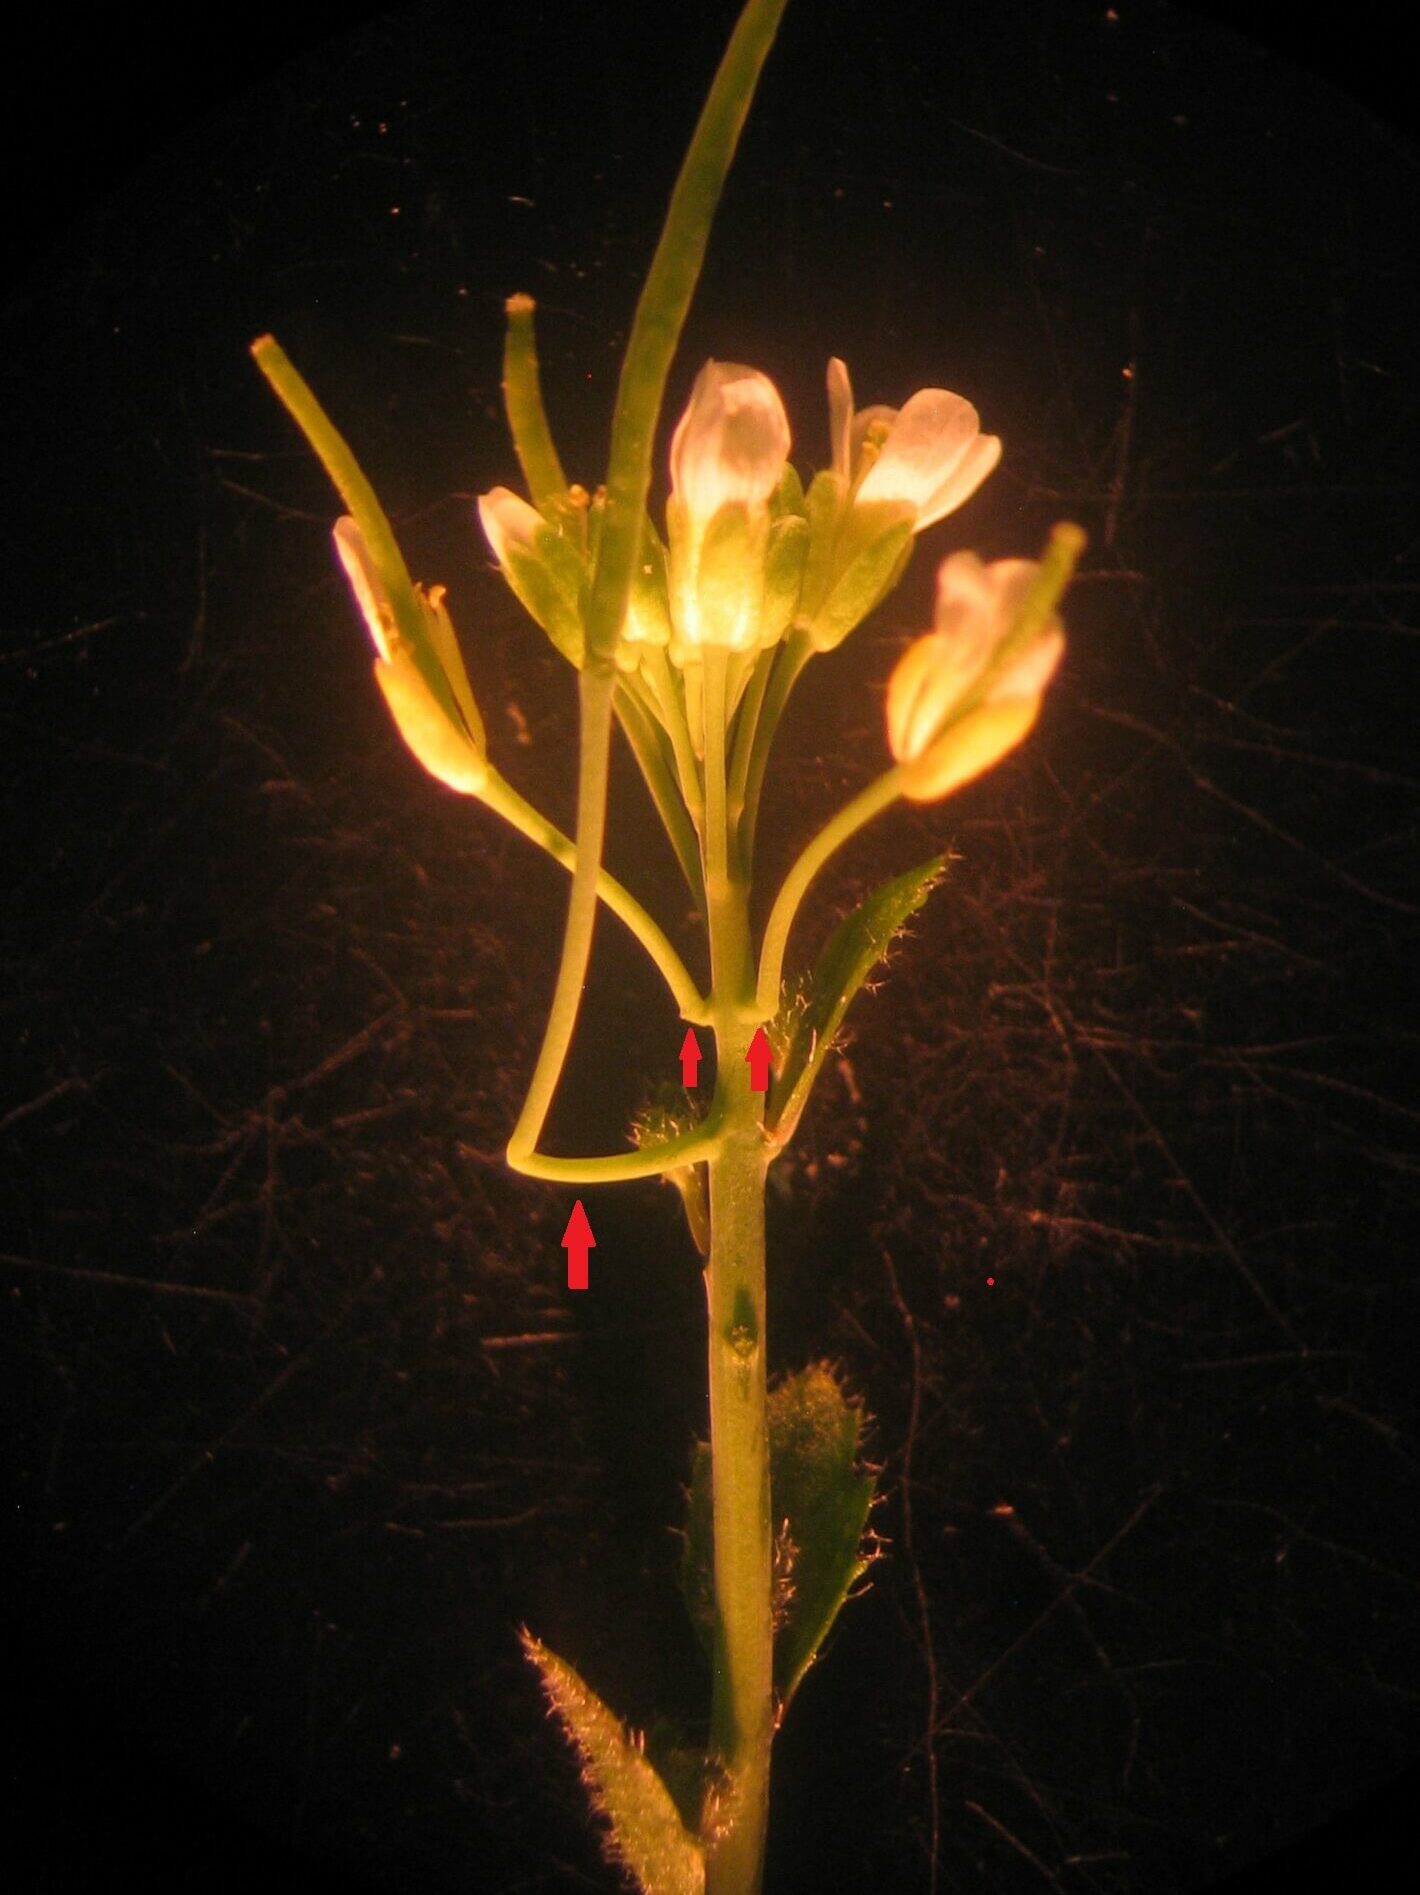 Cantils, so named for their cantilever function of supporting the flower-bearing stalk, are newly reported plant structures that develop in wild-type arabidopsis as a consequence of delayed flowering under short-day lengths.